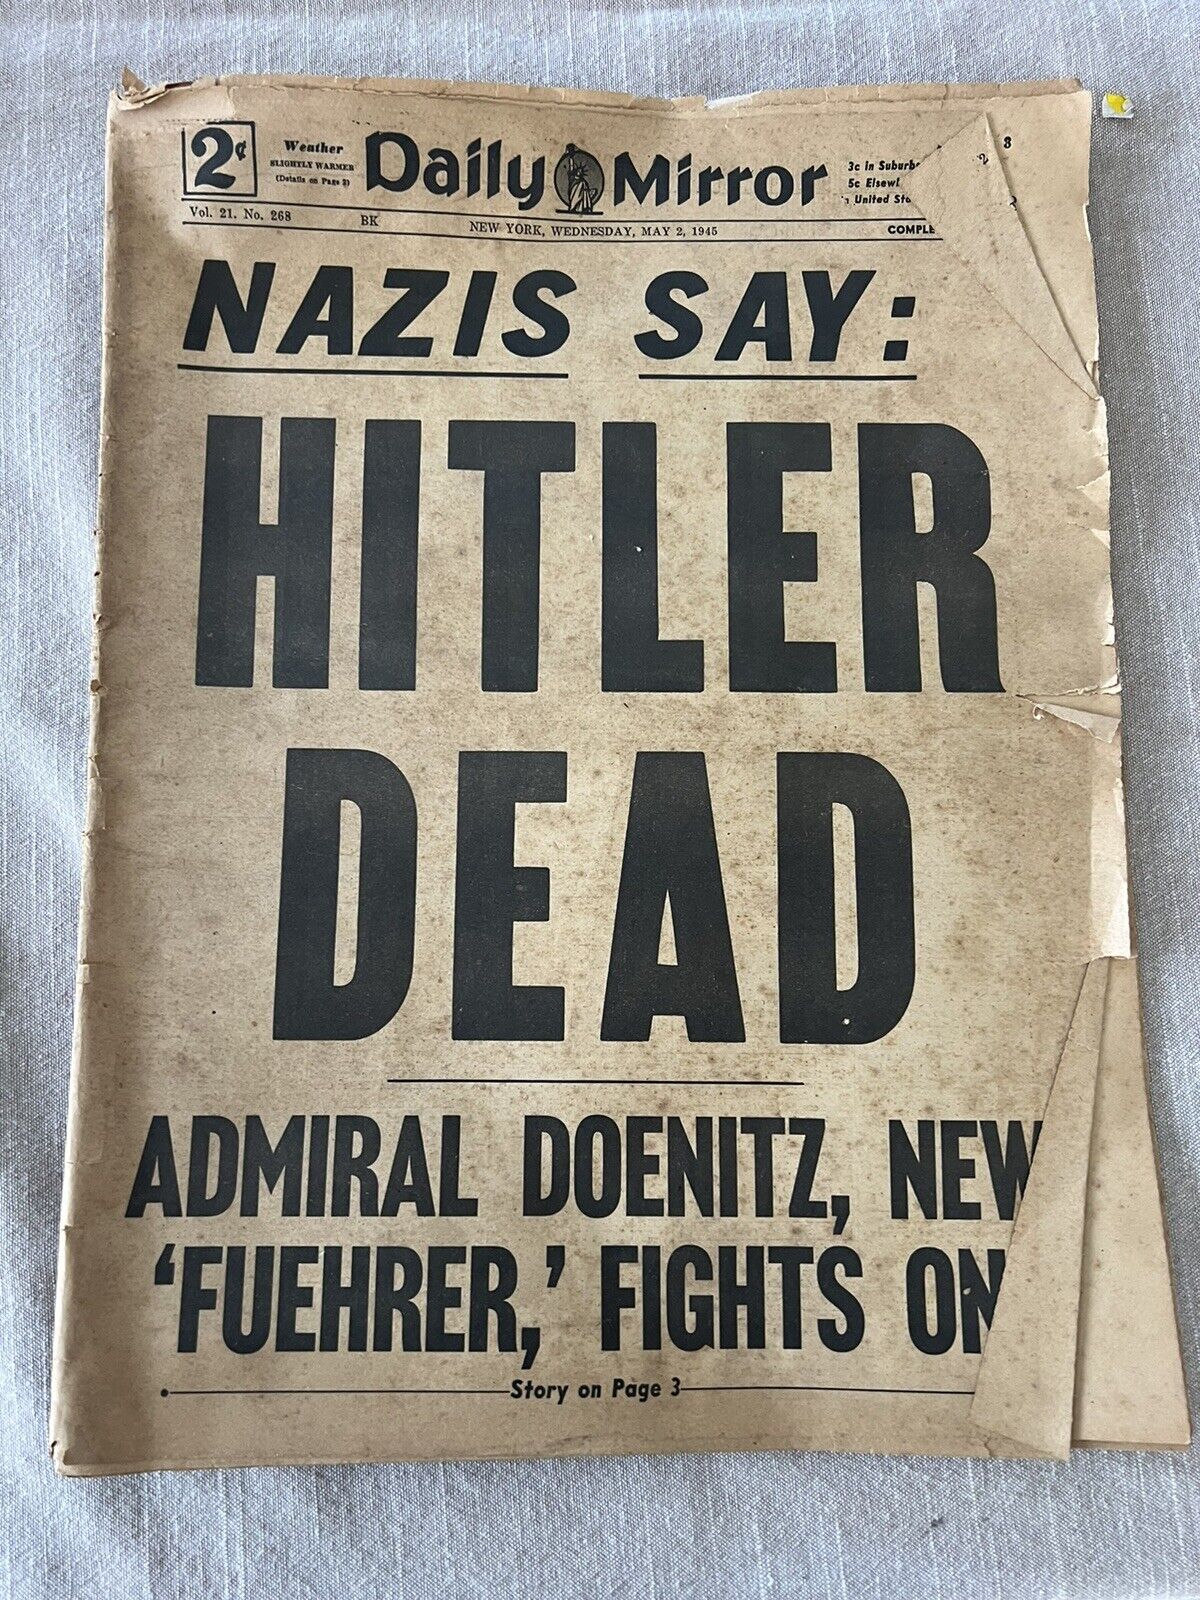 Very Rare Vintage Daily Mirror May 2, 1945 Hitler Dead Newspaper 